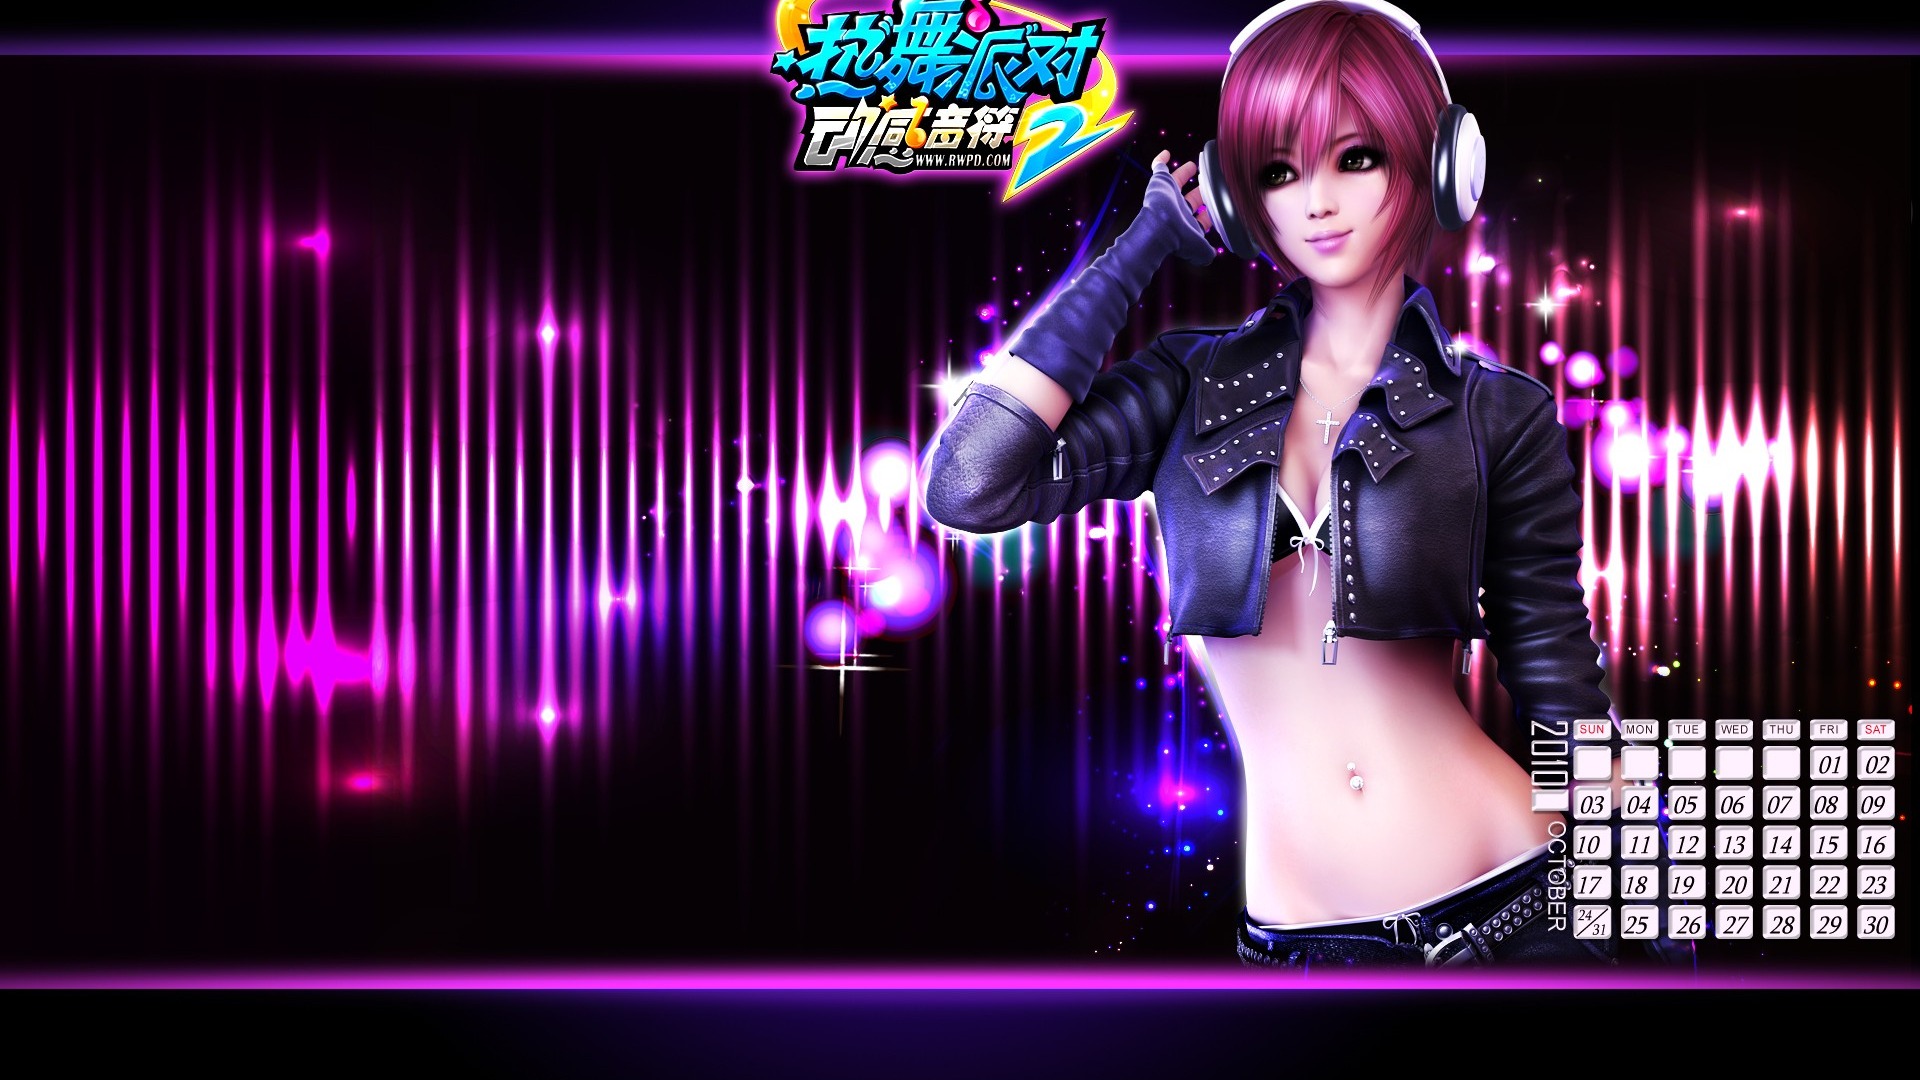 Online game Hot Dance Party II official wallpapers #34 - 1920x1080